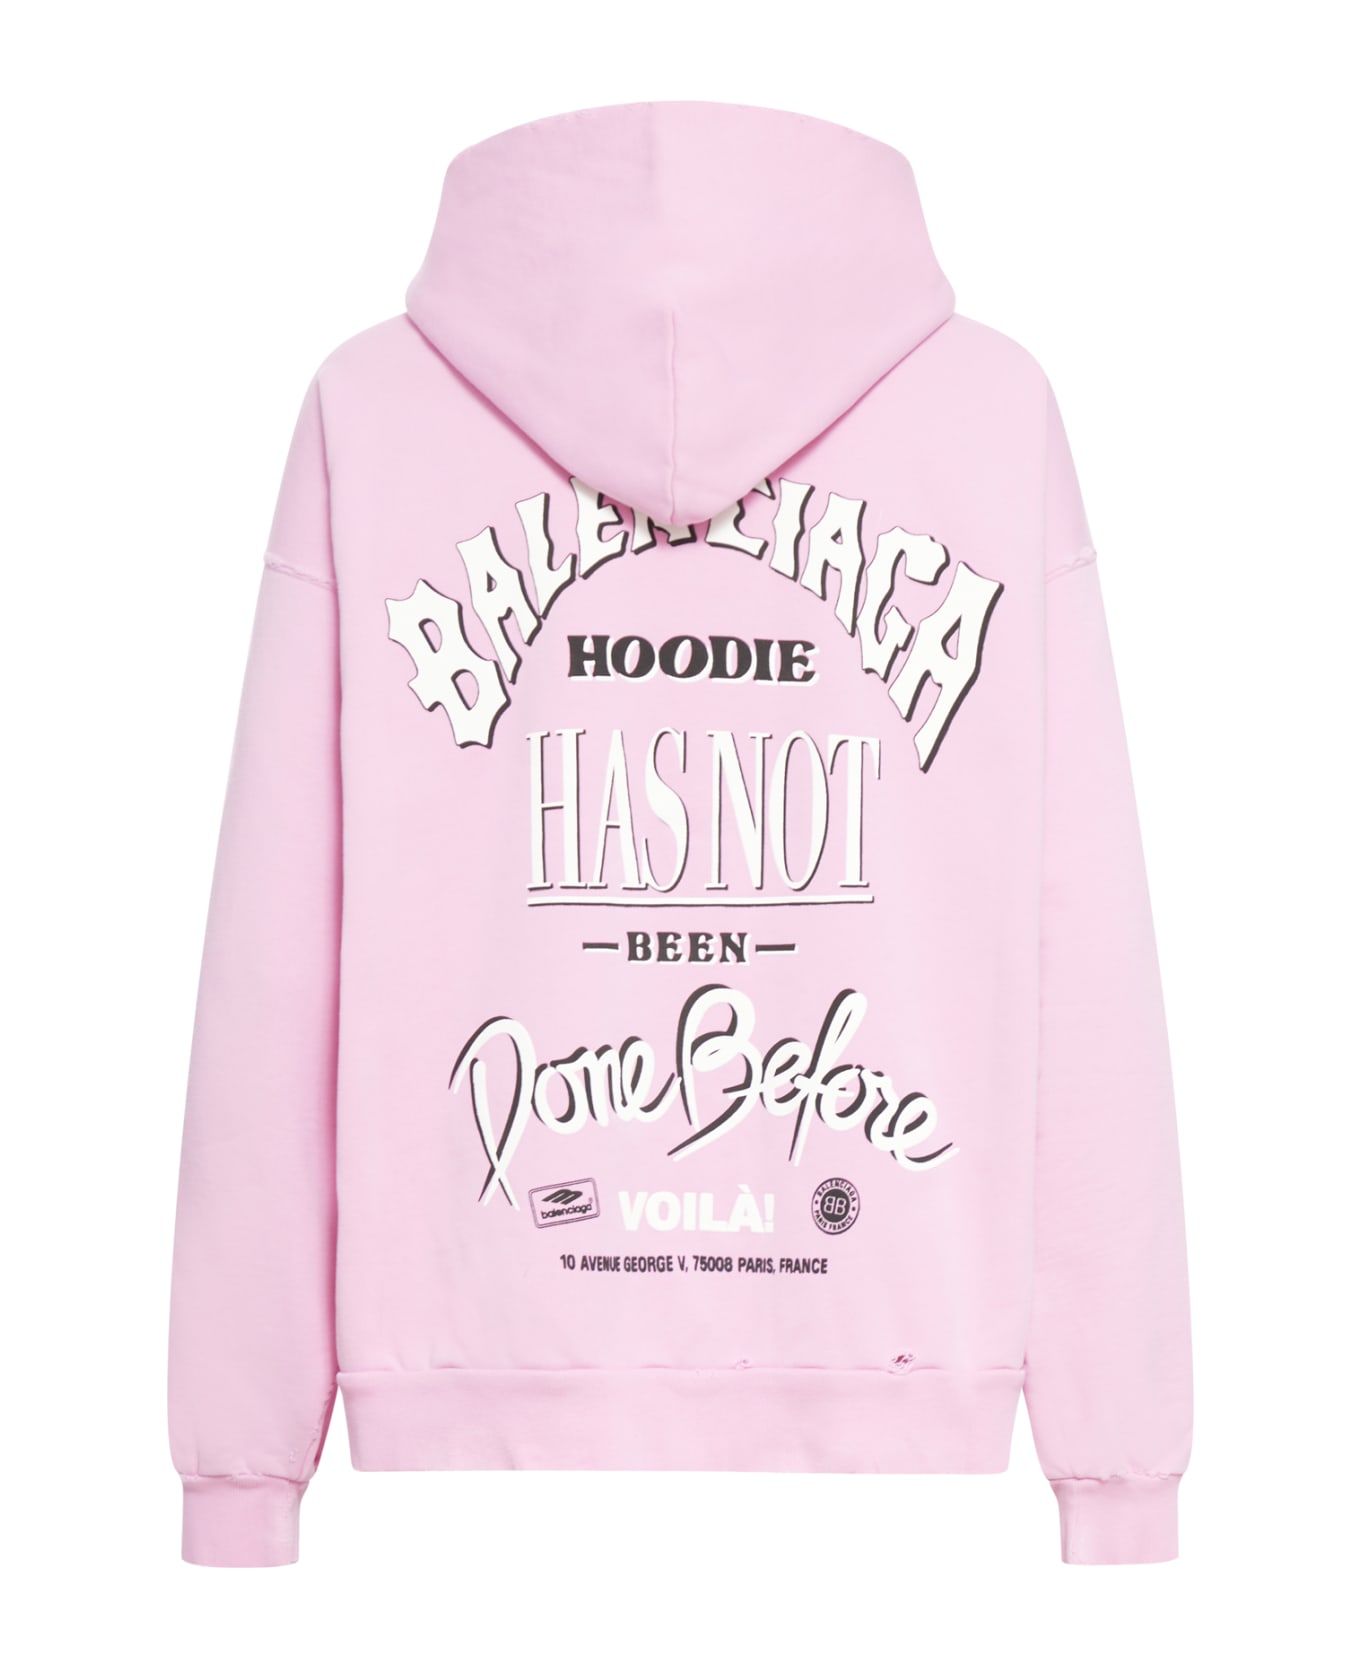 Balenciaga Zip-up Hoodie Not Been Done Archetype Moll - Faded Pink